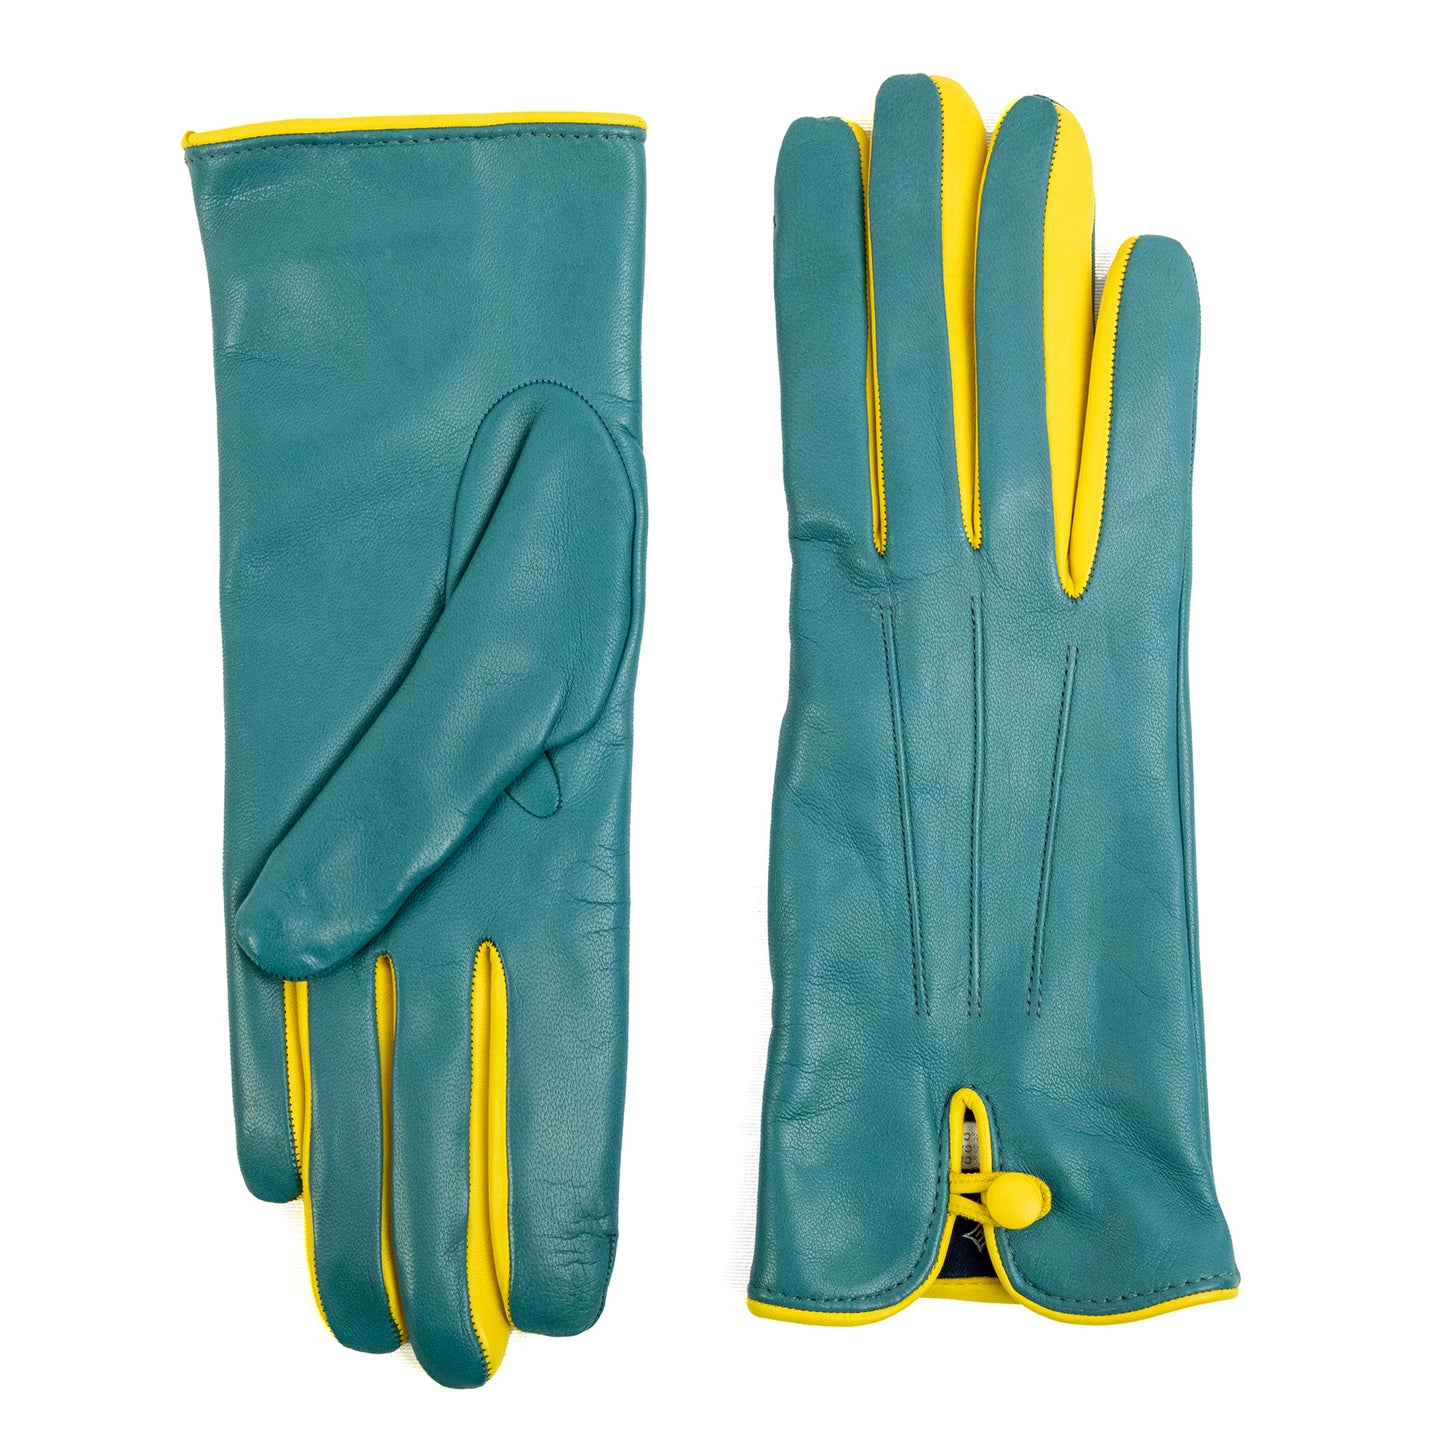 Women's teal nappa leather gloves with button and cashmere lining